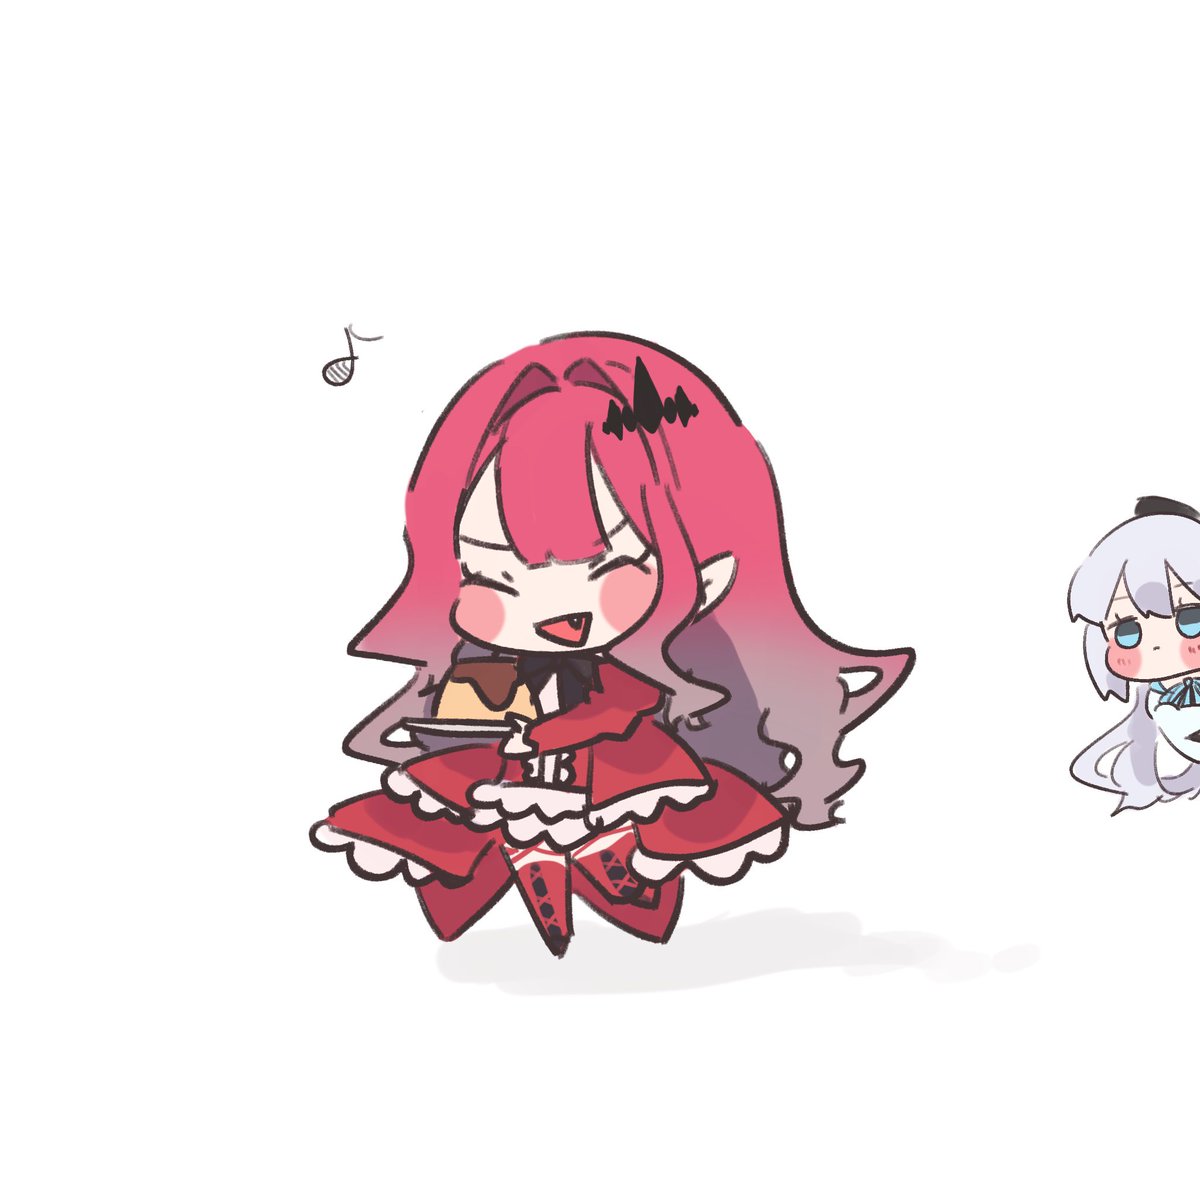 fairy knight tristan (fate) ,morgan le fay (fate) multiple girls 2girls red dress chibi long hair food closed eyes  illustration images